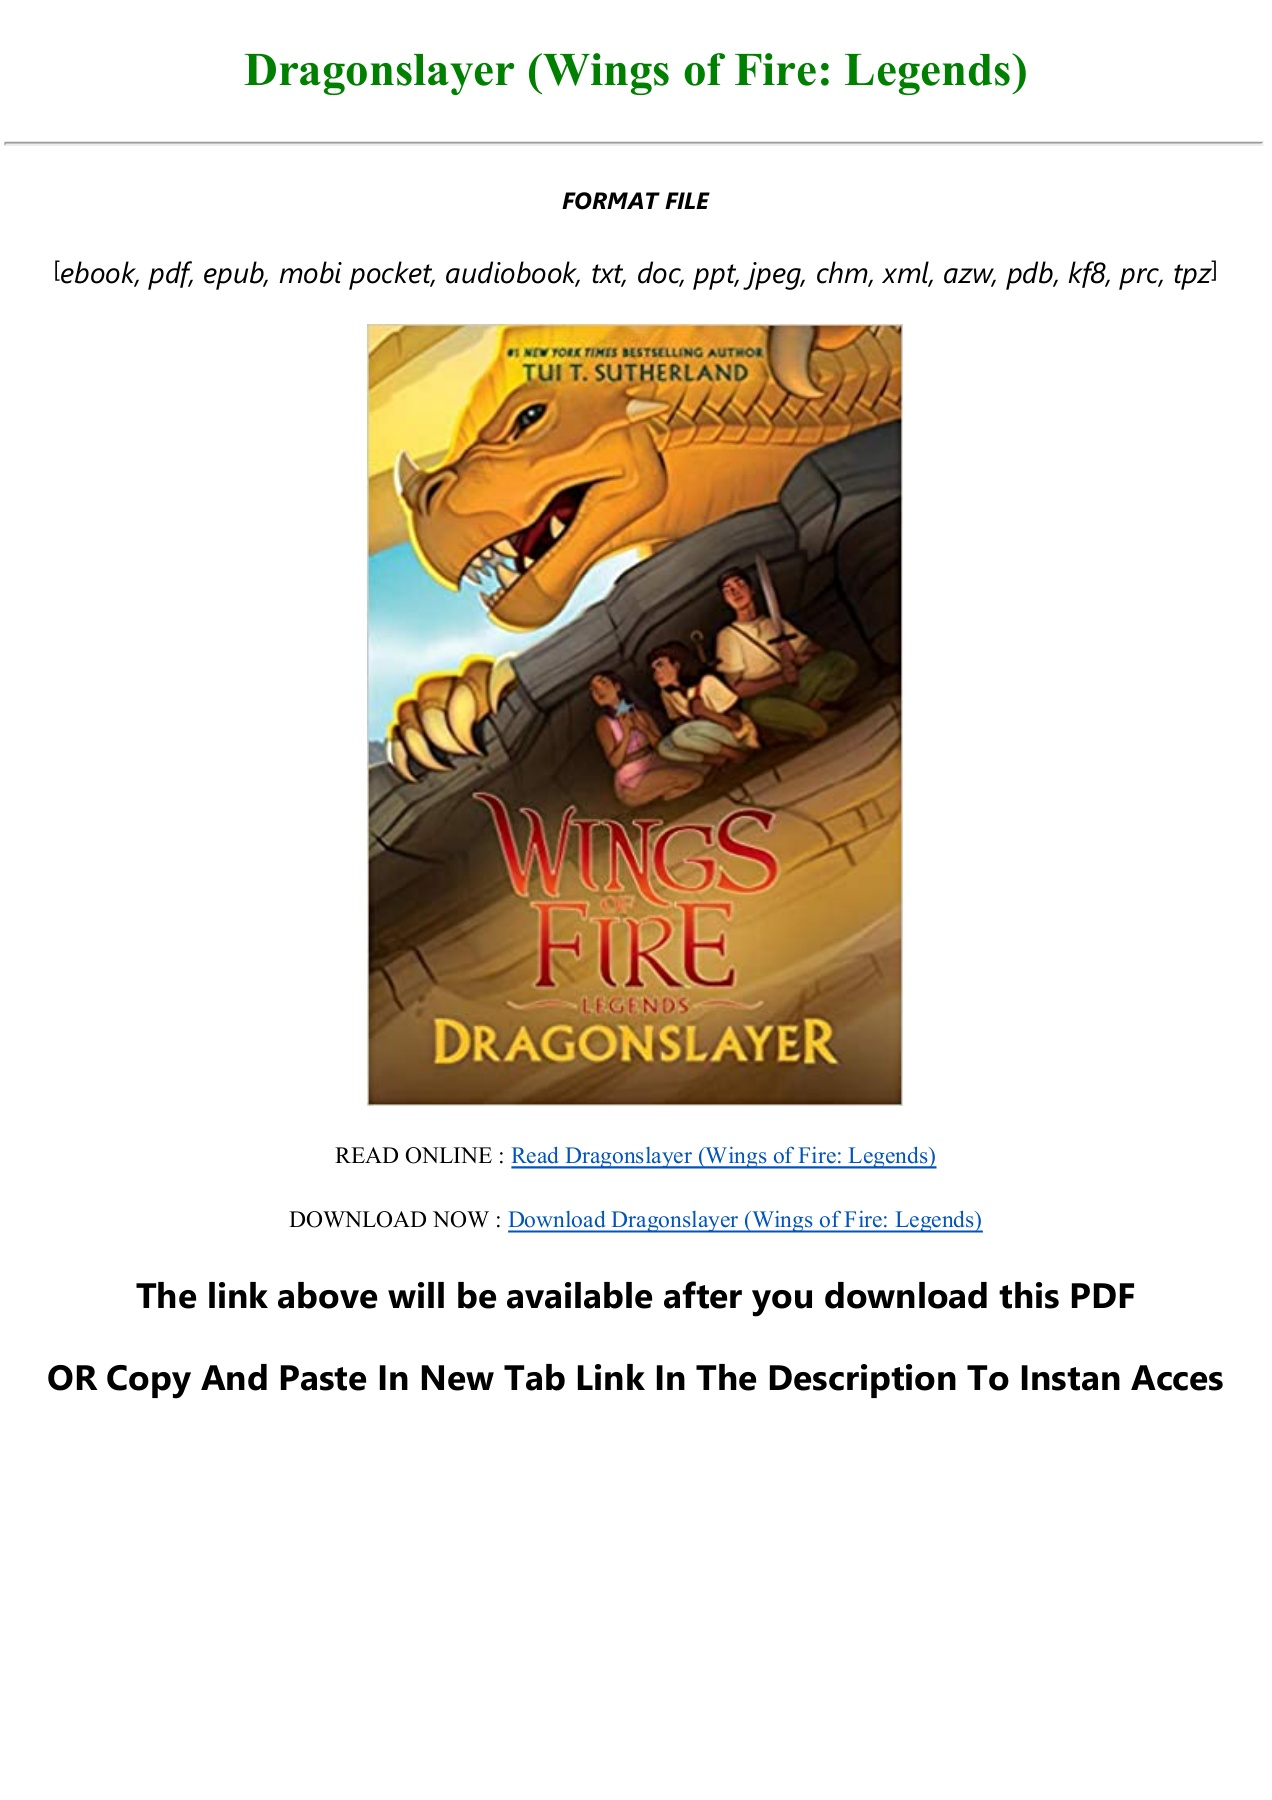 wings of fire pdf free download